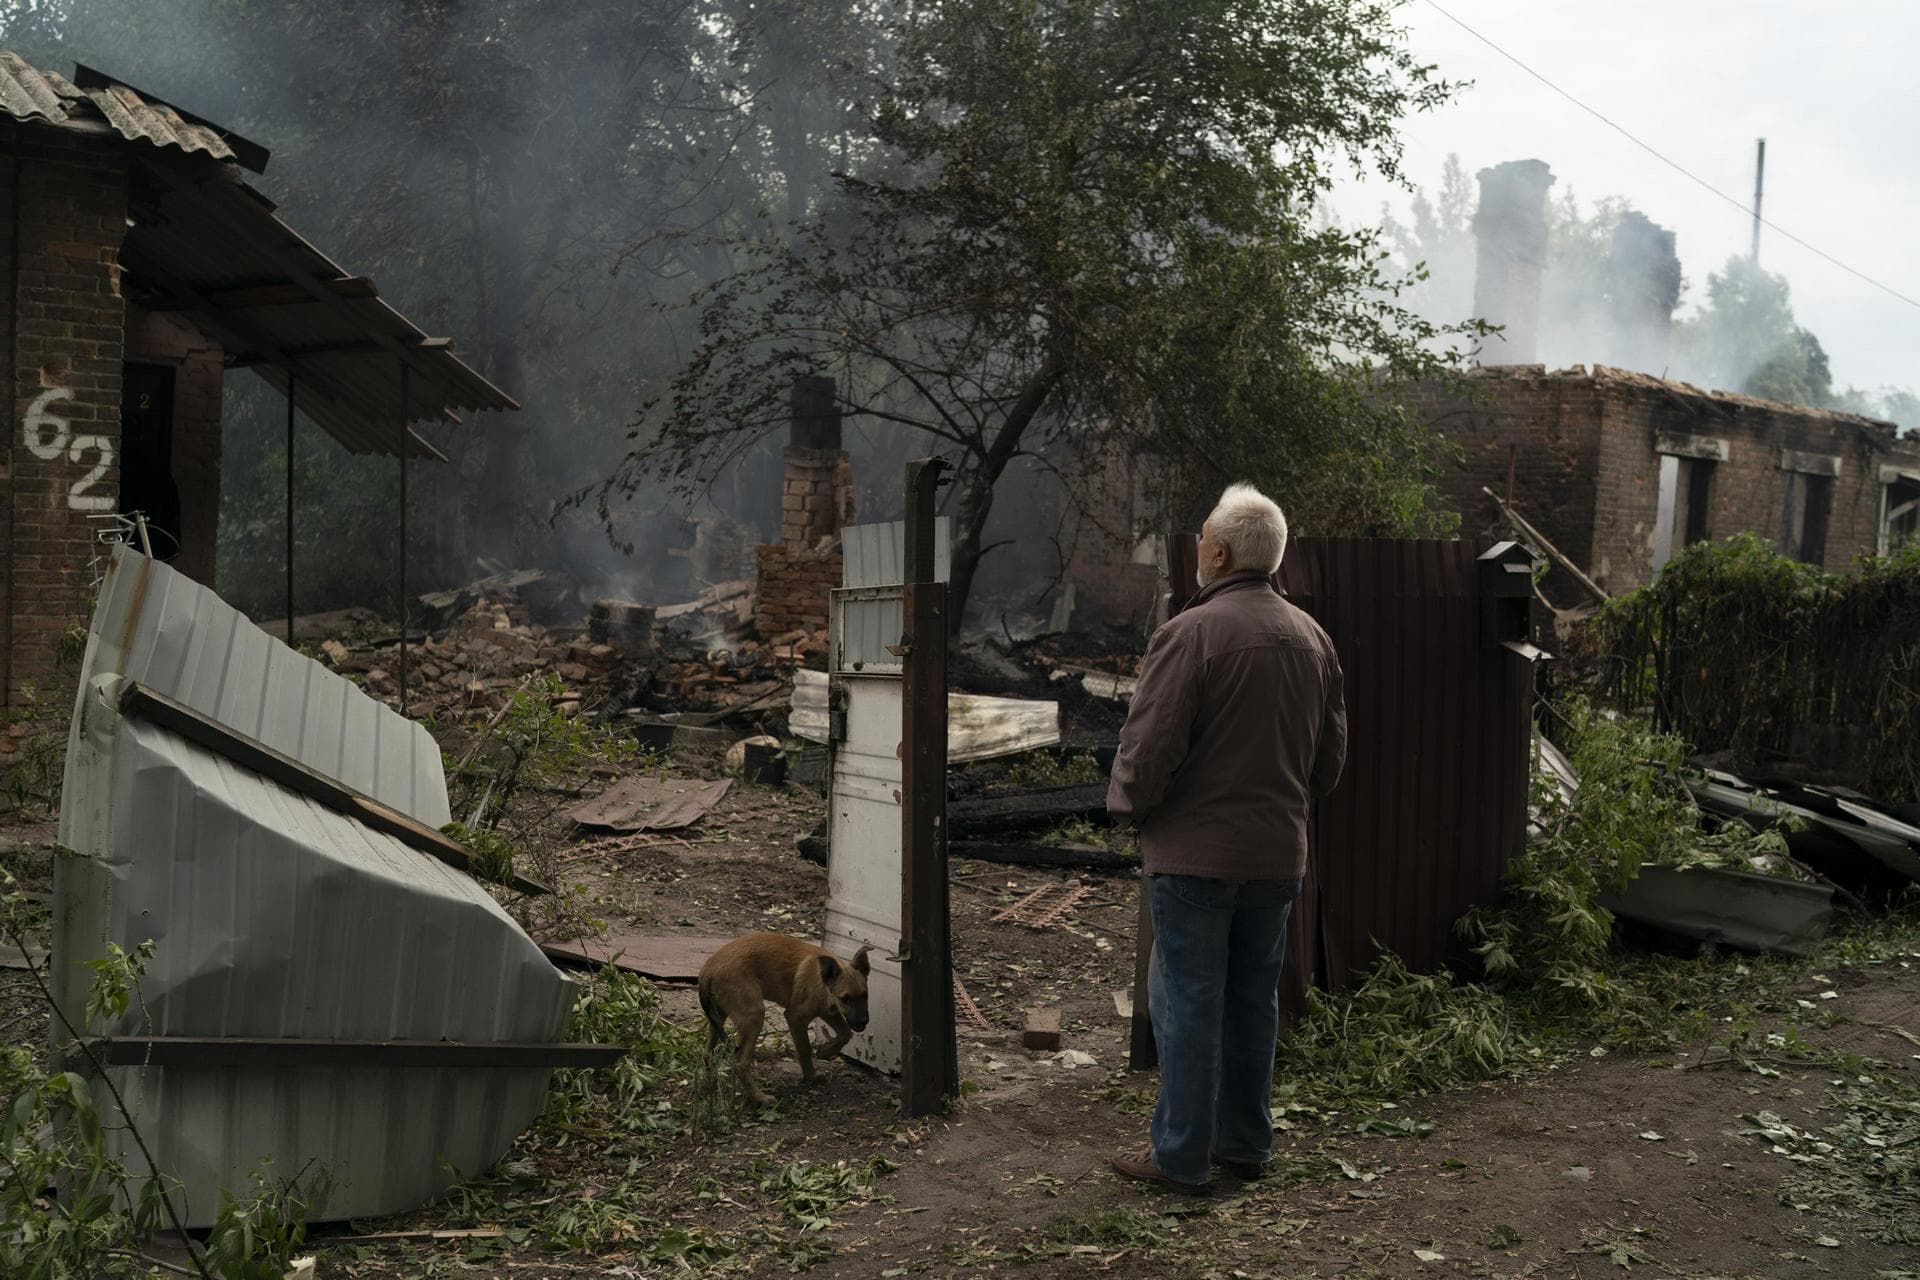 Oleksander Zaitsev stands in front of the house where his friend was found dead after a Russian attack in Pokrovsk region